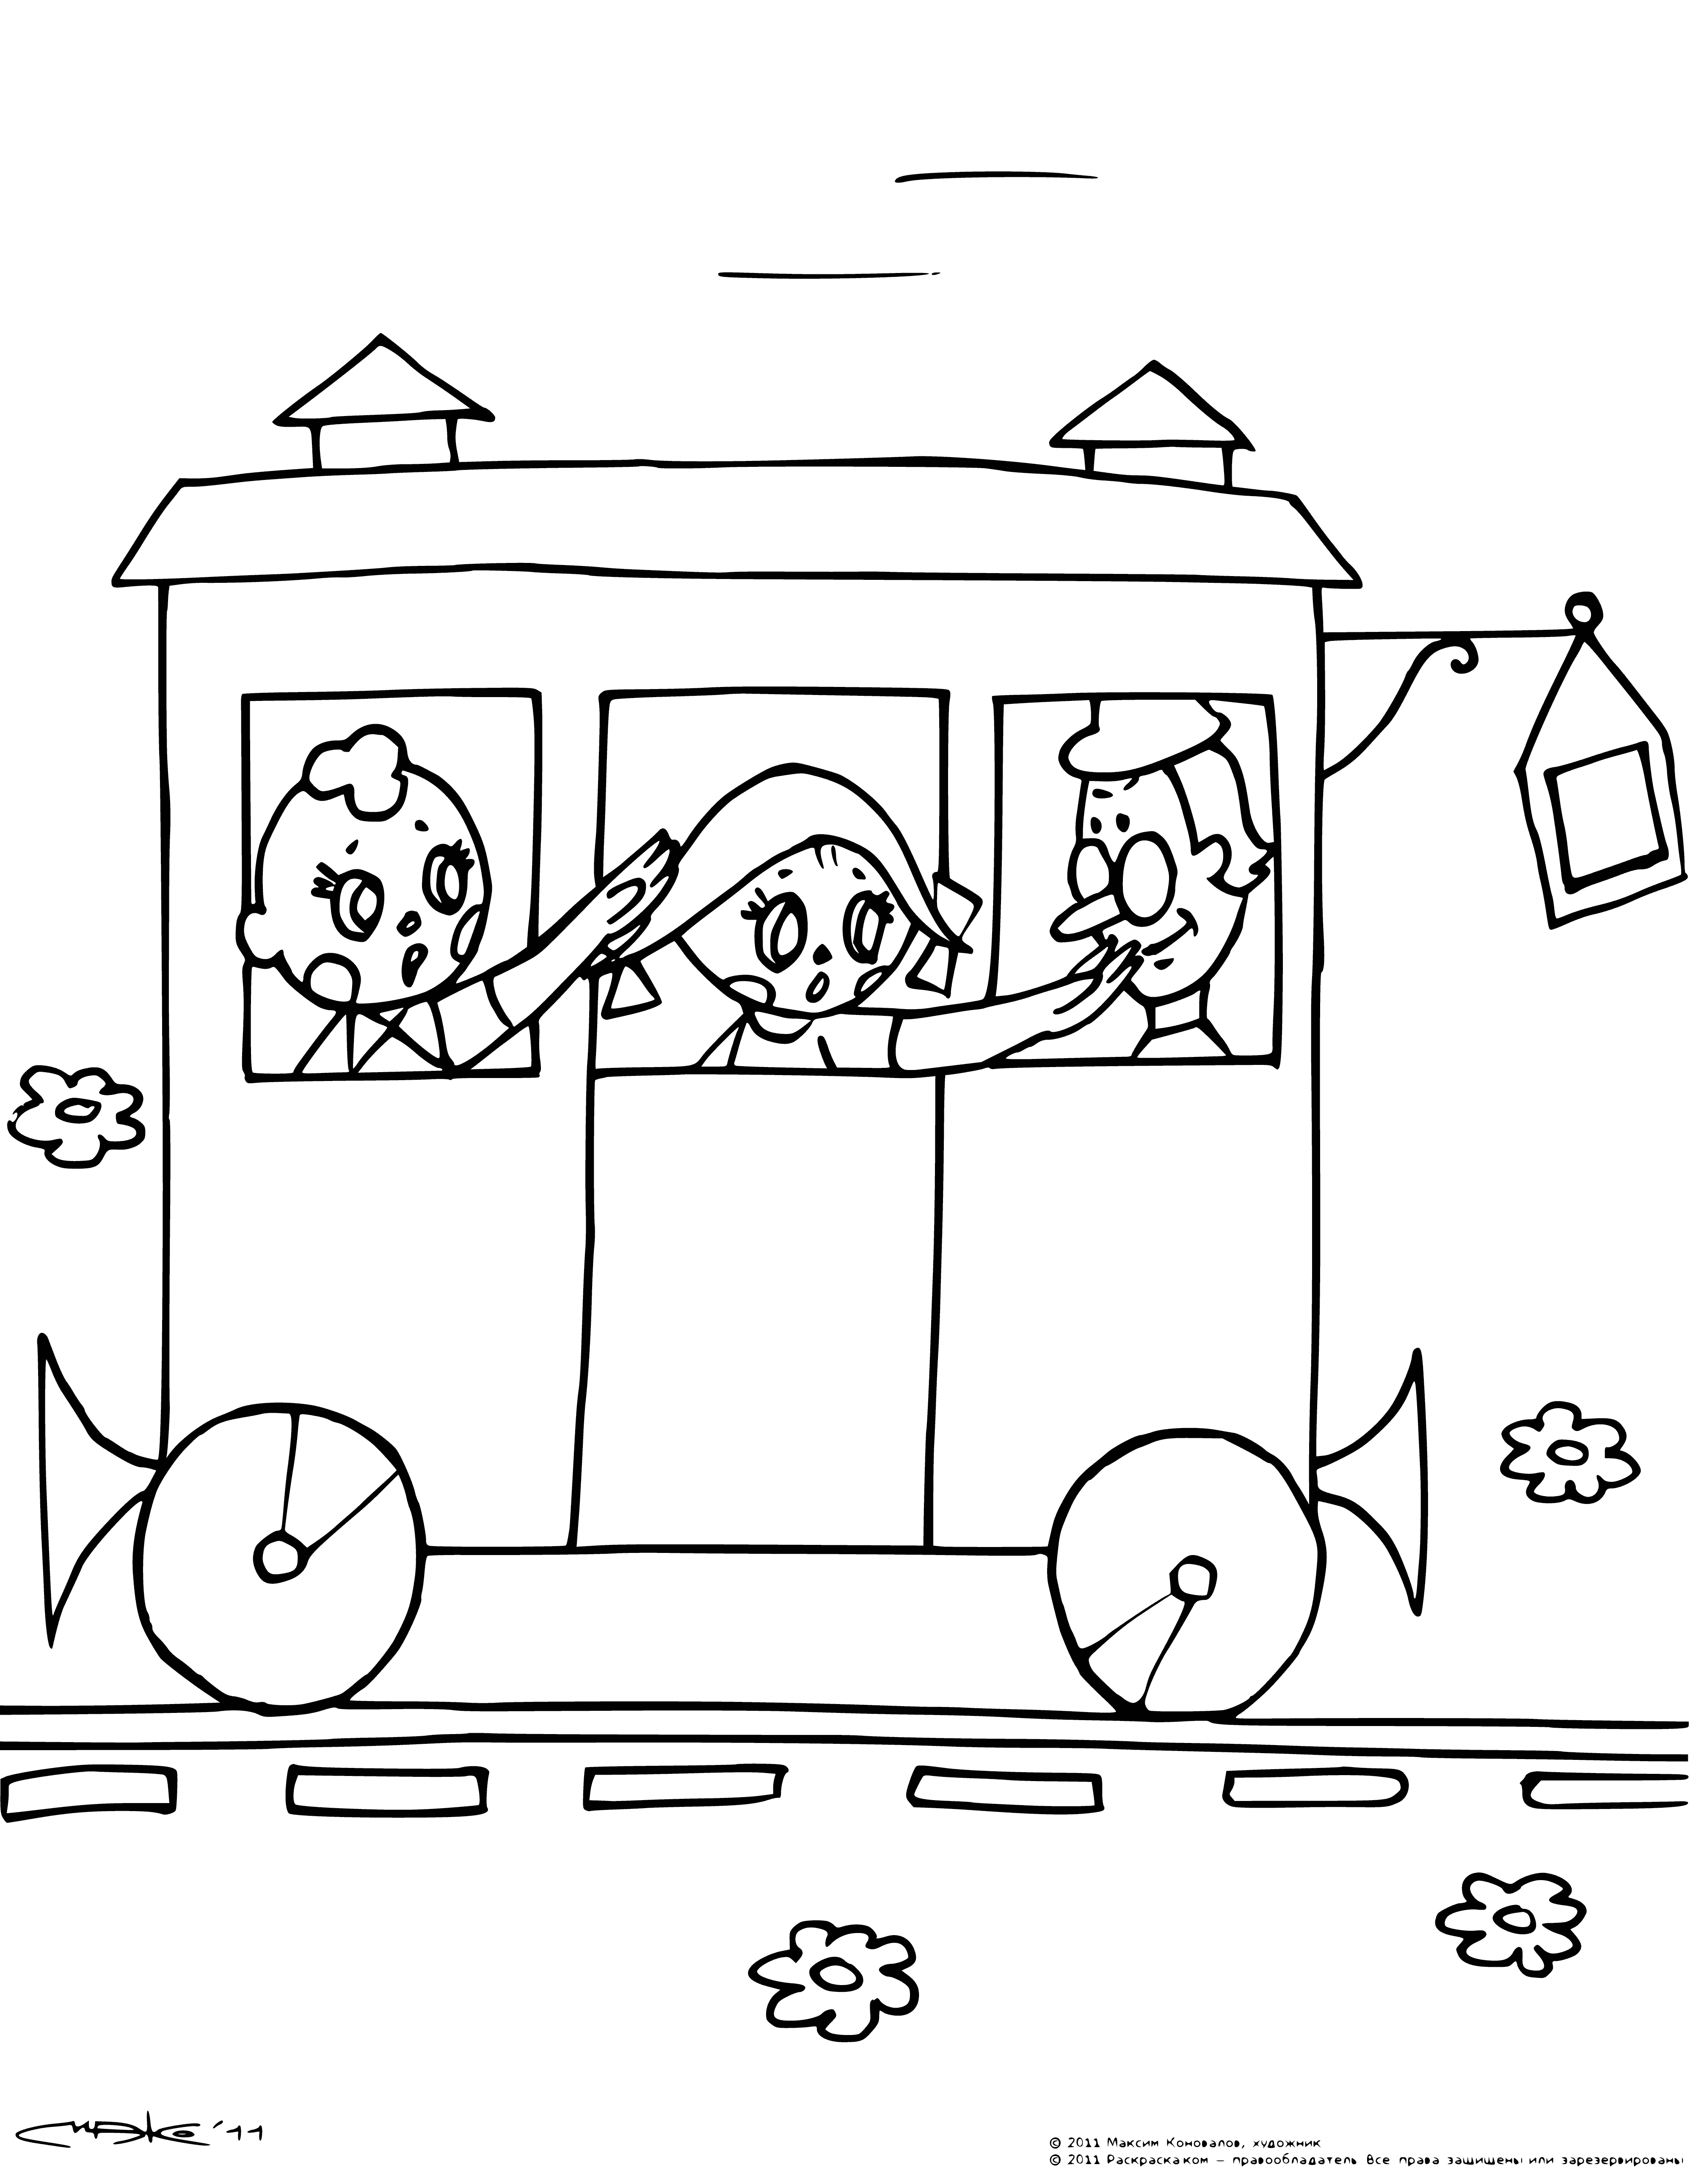 coloring page: Colorful coloring page of a train from Romashkovo with children on board.